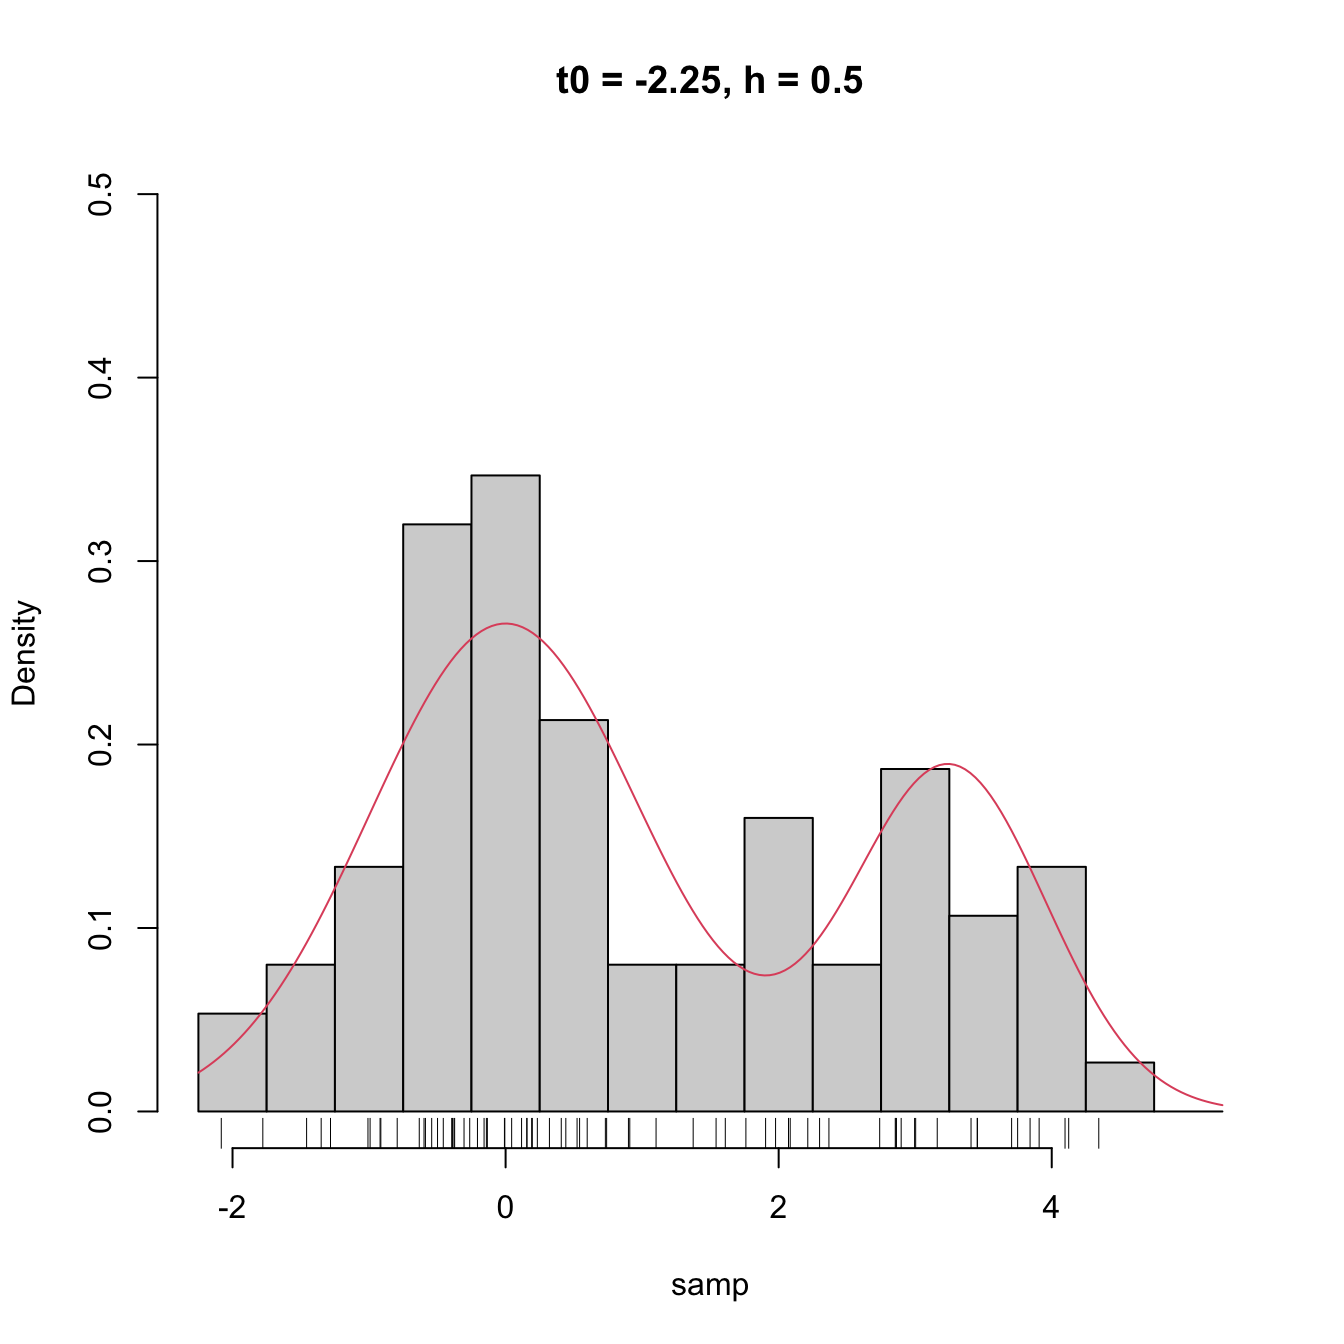 The dependence of the histogram on the origin \(t_0\) for non-compactly supported densities. The red curve represents the underlying pdf, a mixture of two normals.